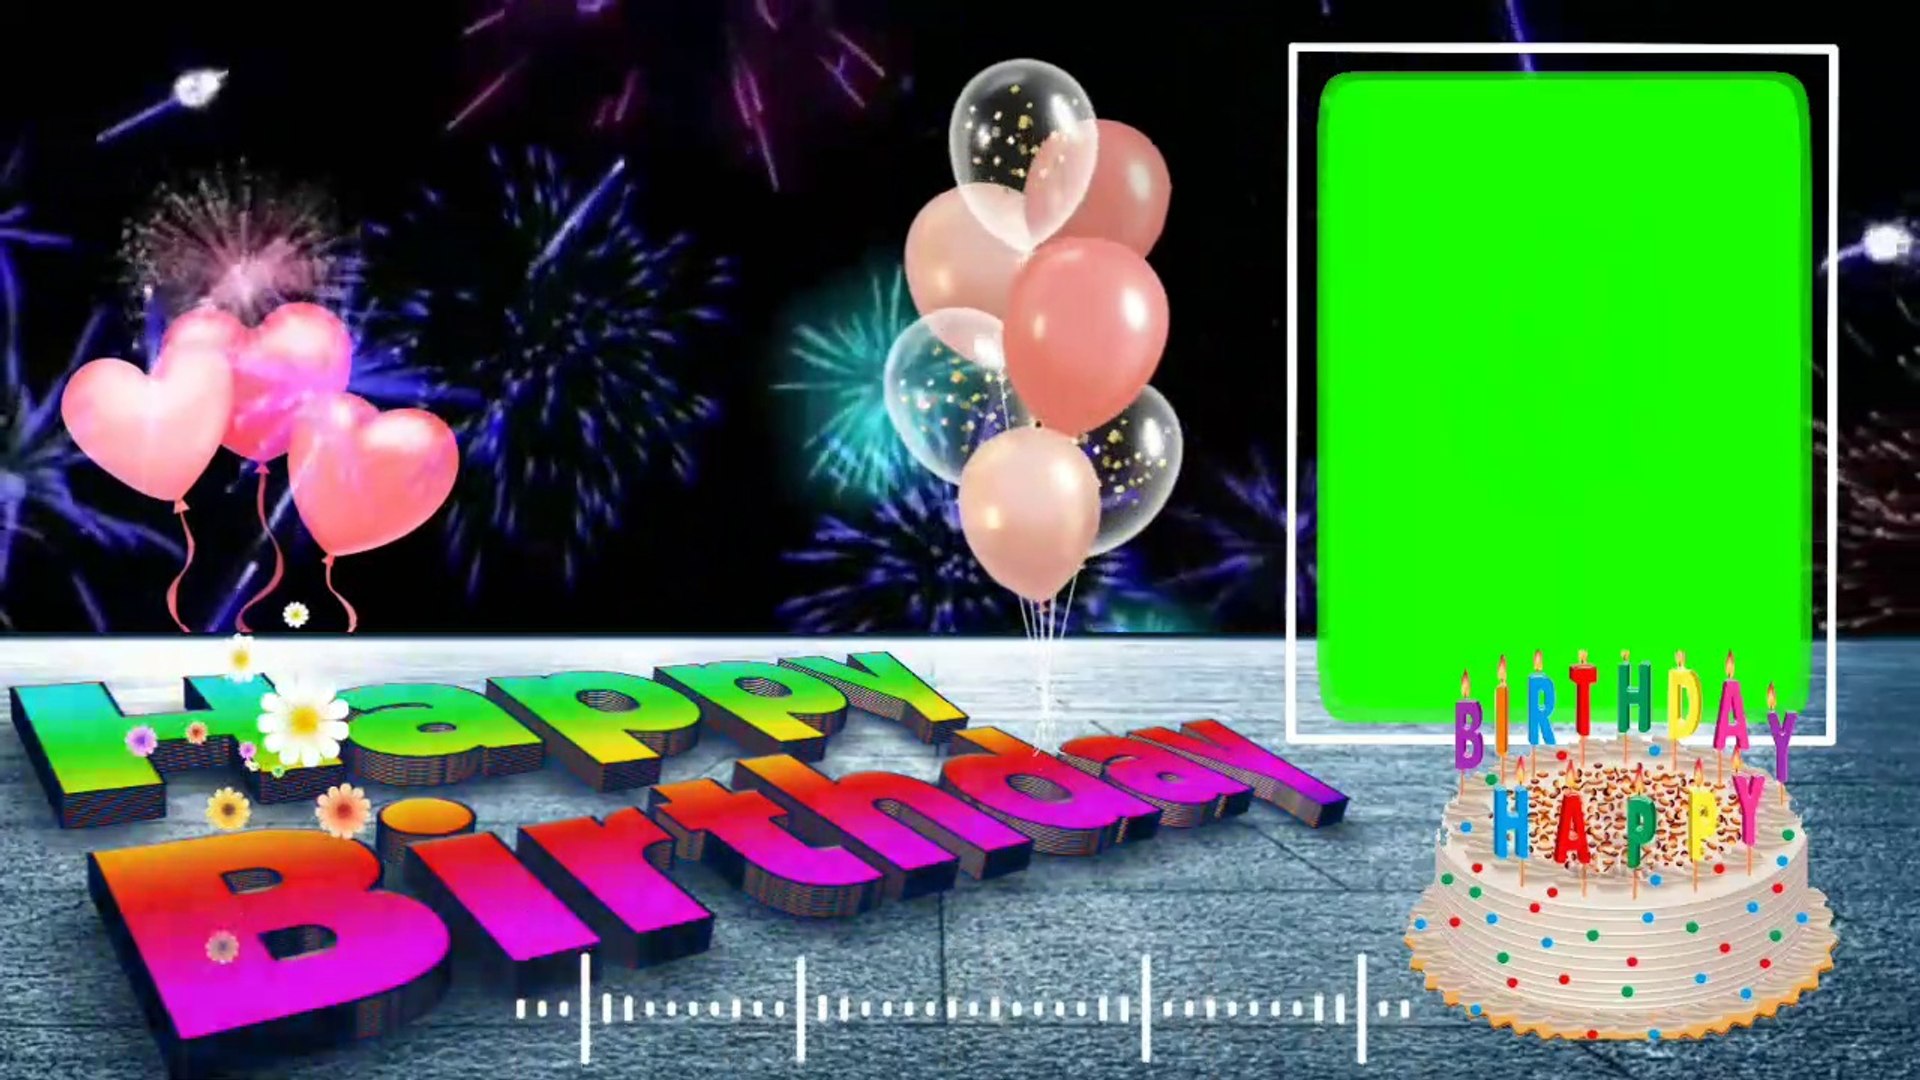 Happy birthday green screen effects background video | happy birthday green  screen effects video2021 - video Dailymotion